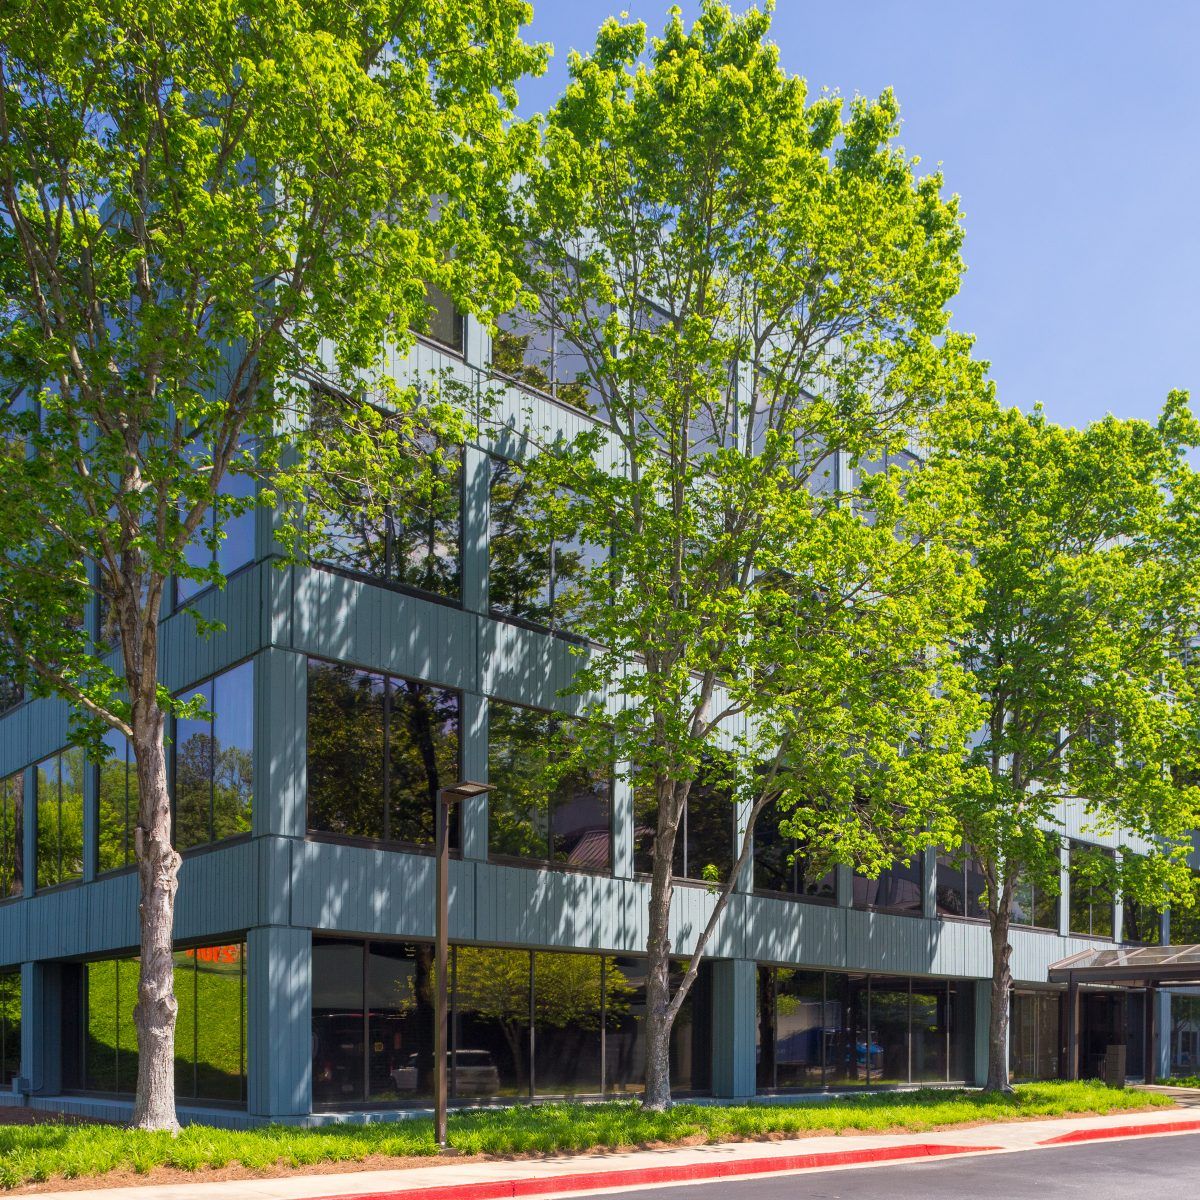 Tall green trees stand in front of the grey and glass Shadowood office park